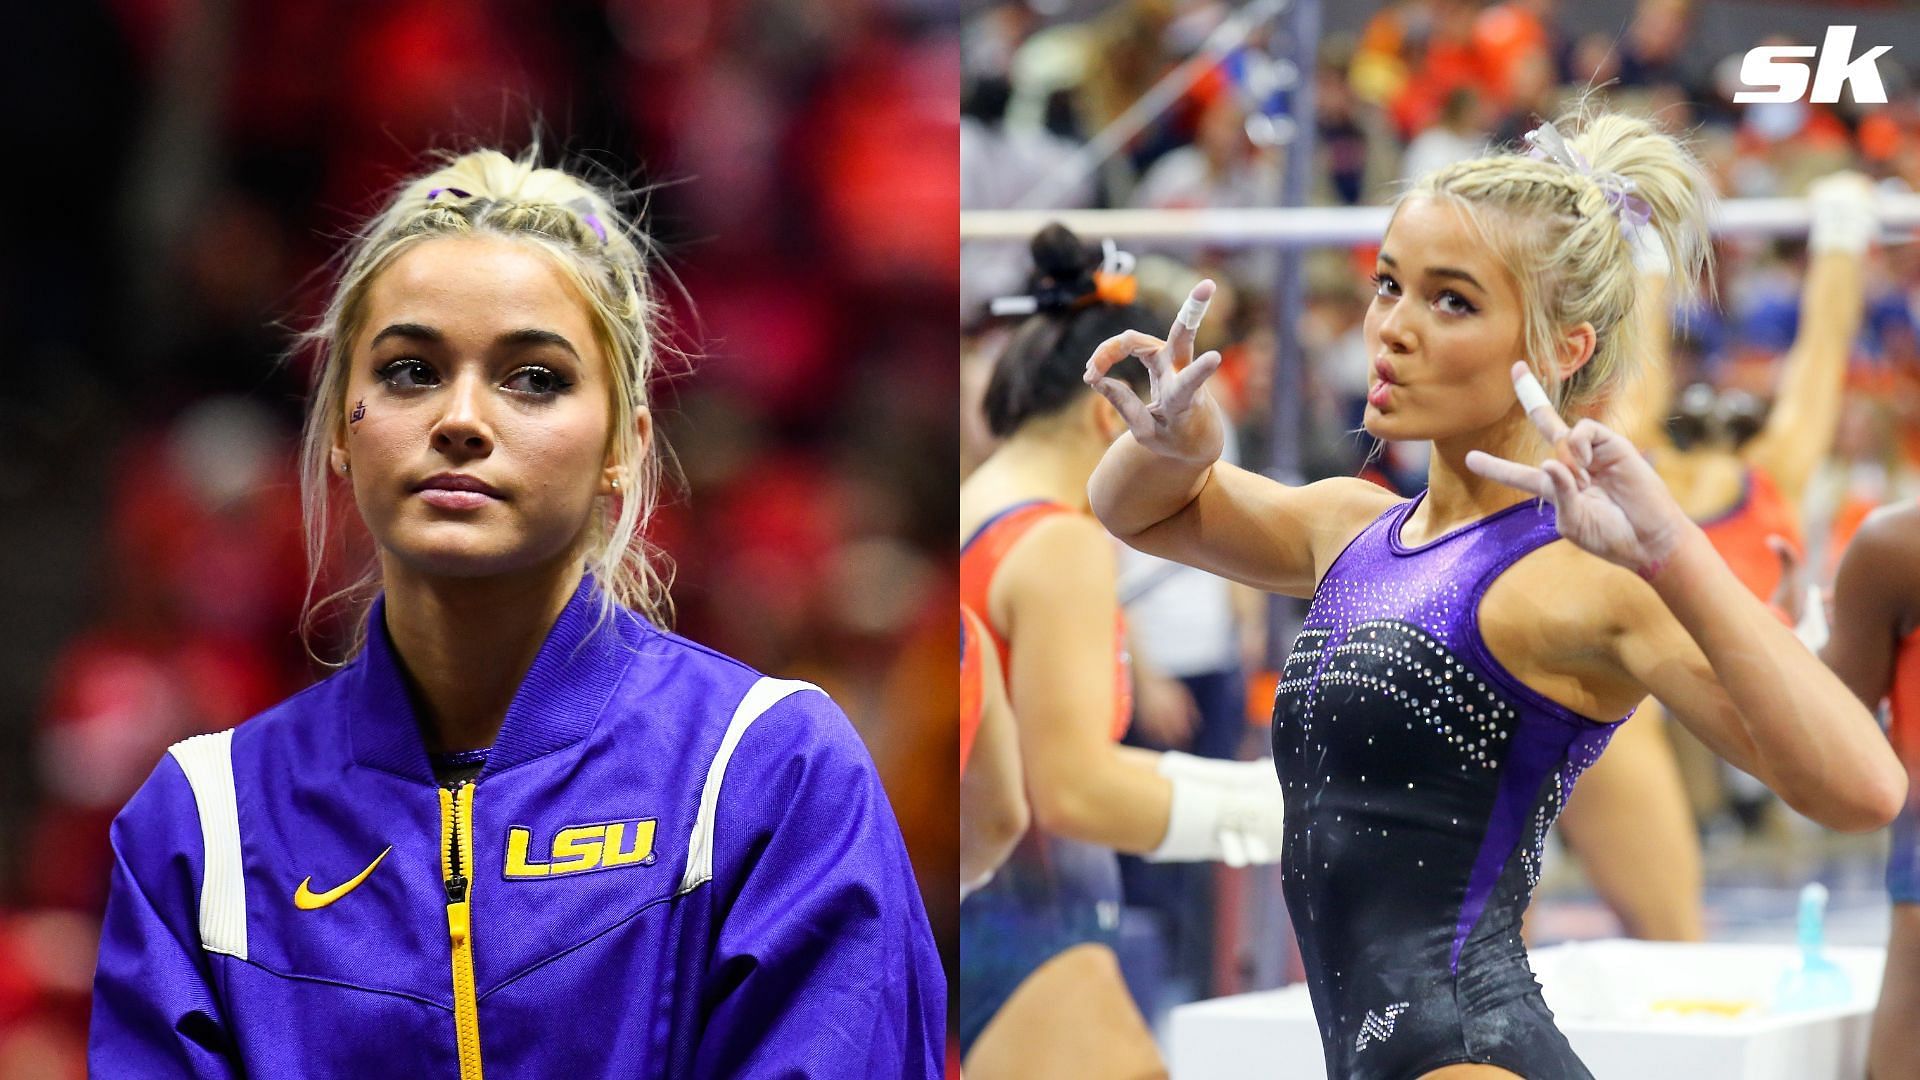 Olivia Dunne hits the right chords with viral TikTok dance after blazing LSU performance